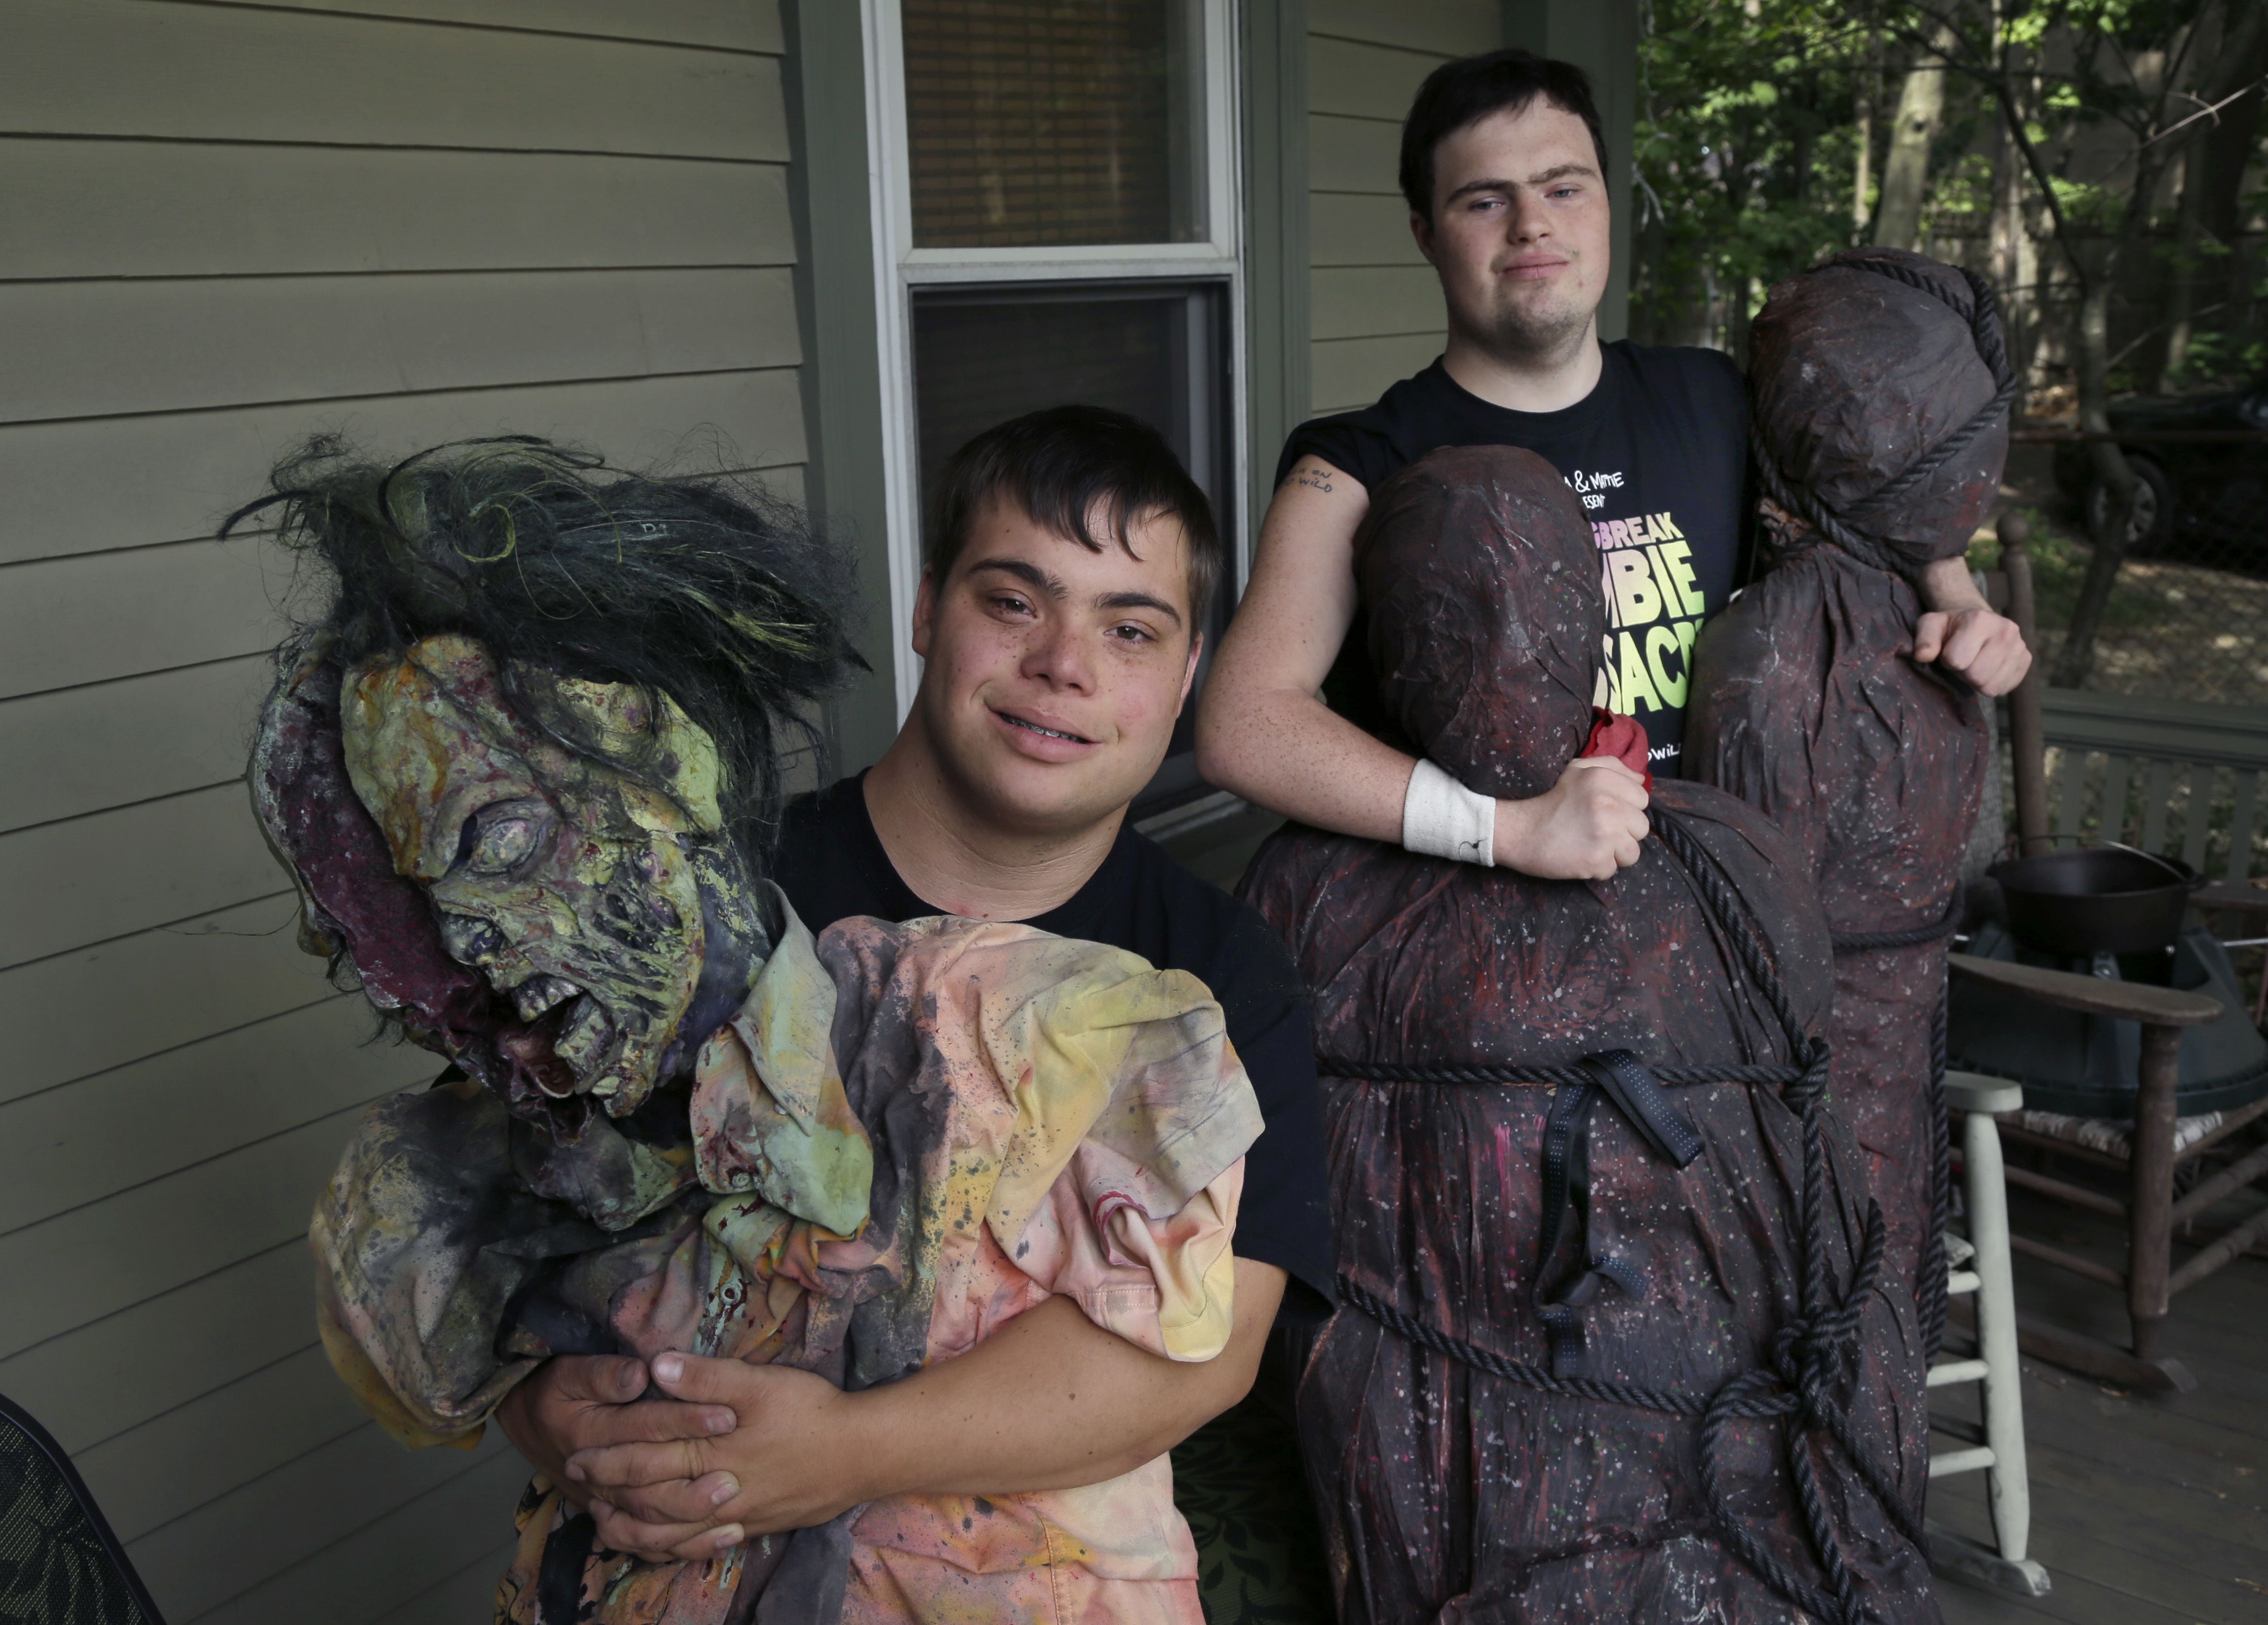 New film follows 2 zombie moviemakers with Down syndrome